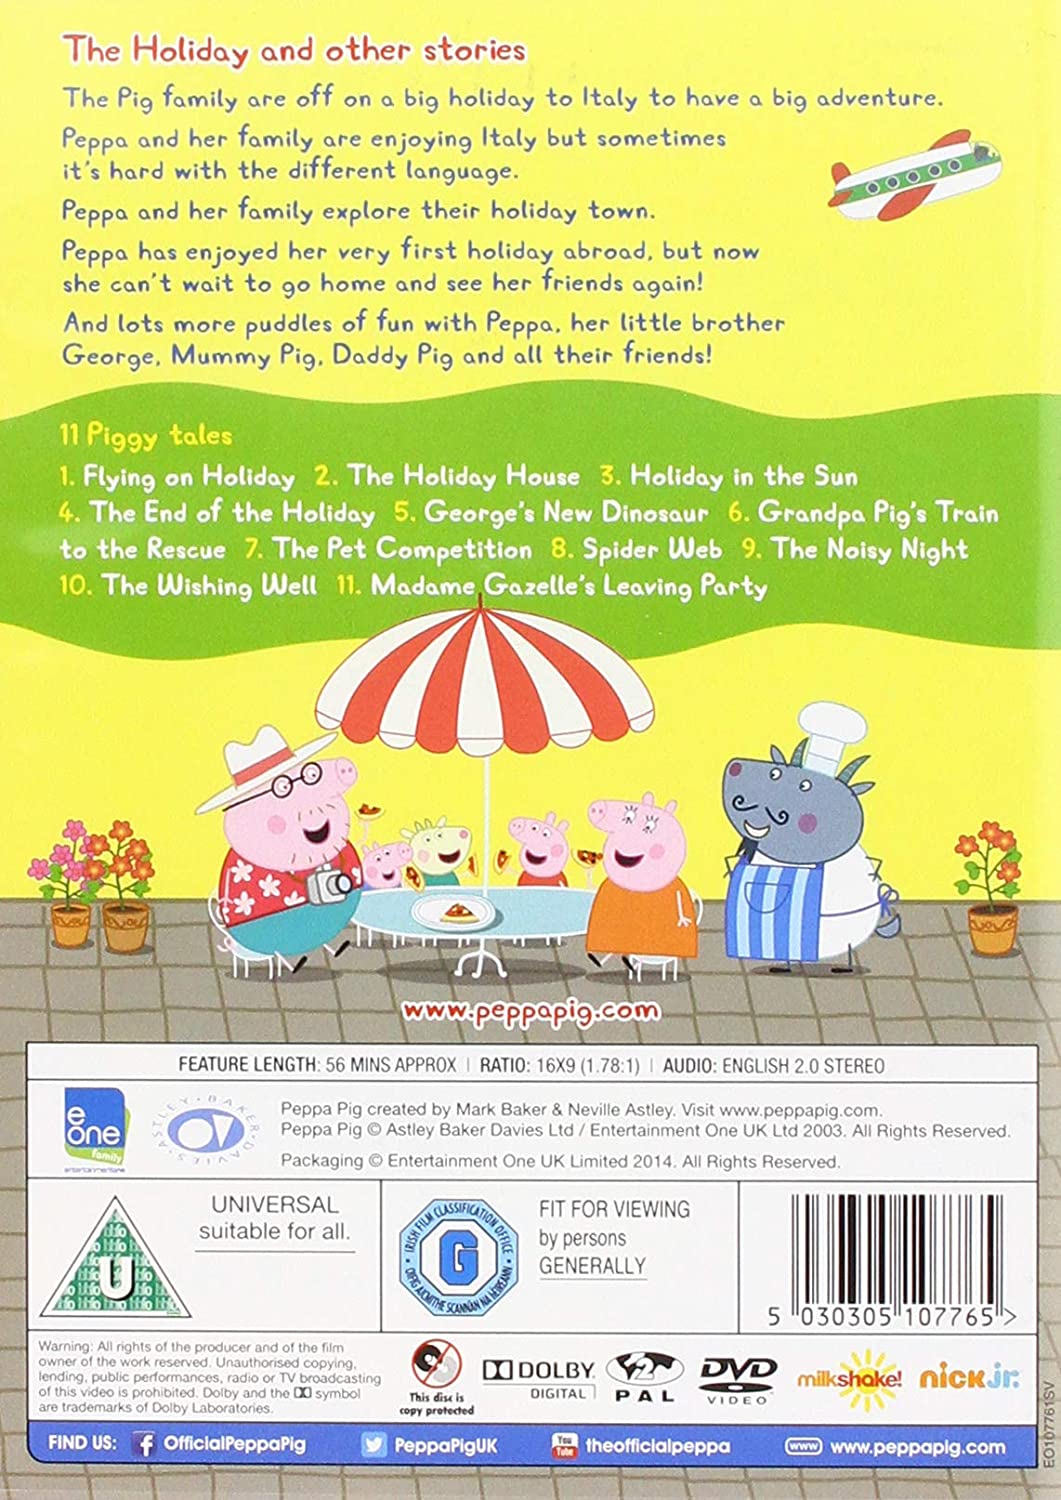 Peppa Pig: The Holiday [Volume 19]